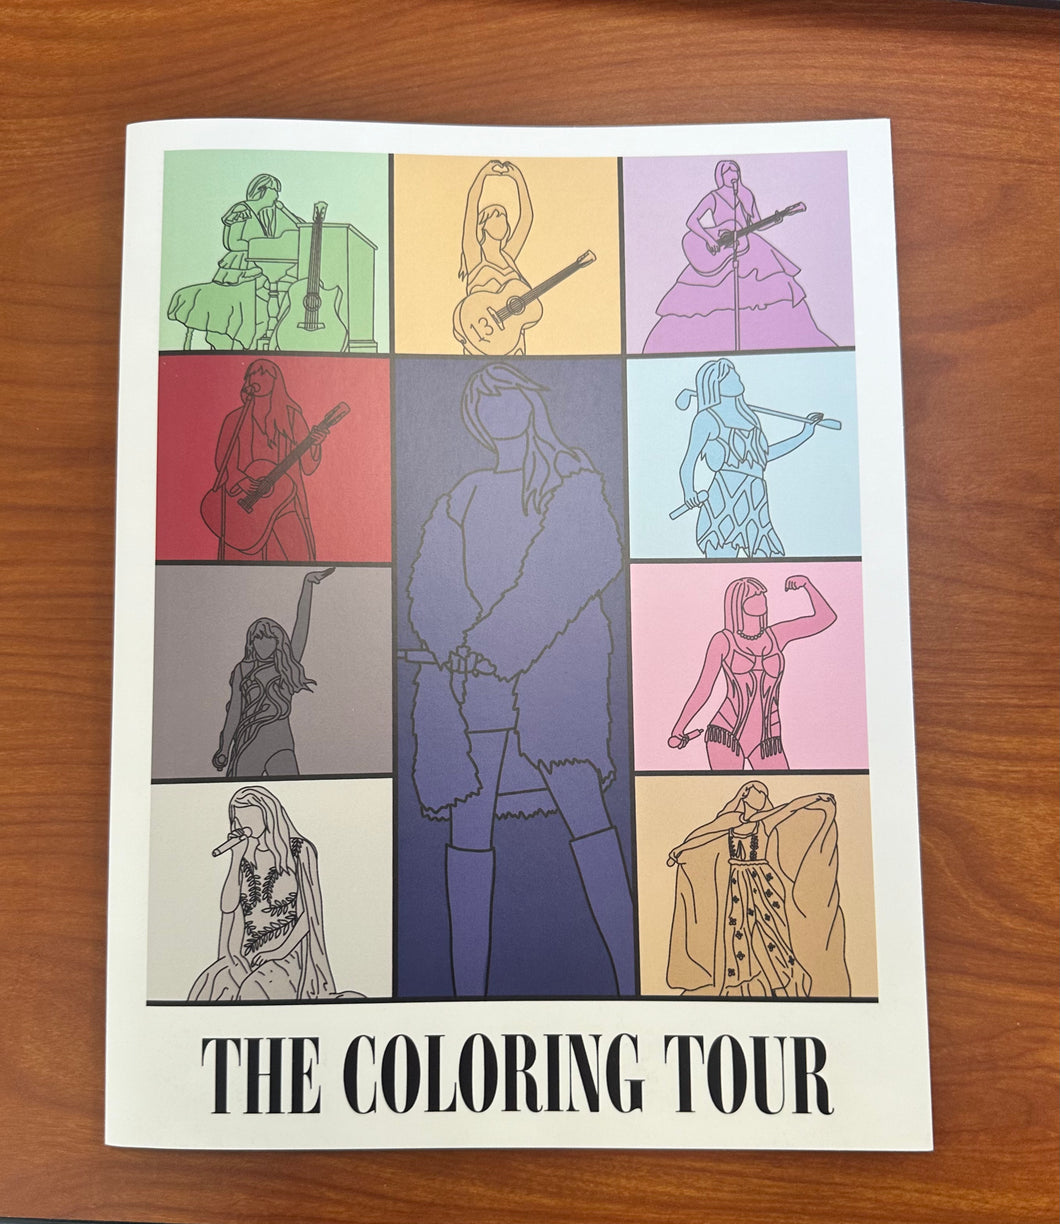 Taylor Swift Coloring Book – Magical by Marissa